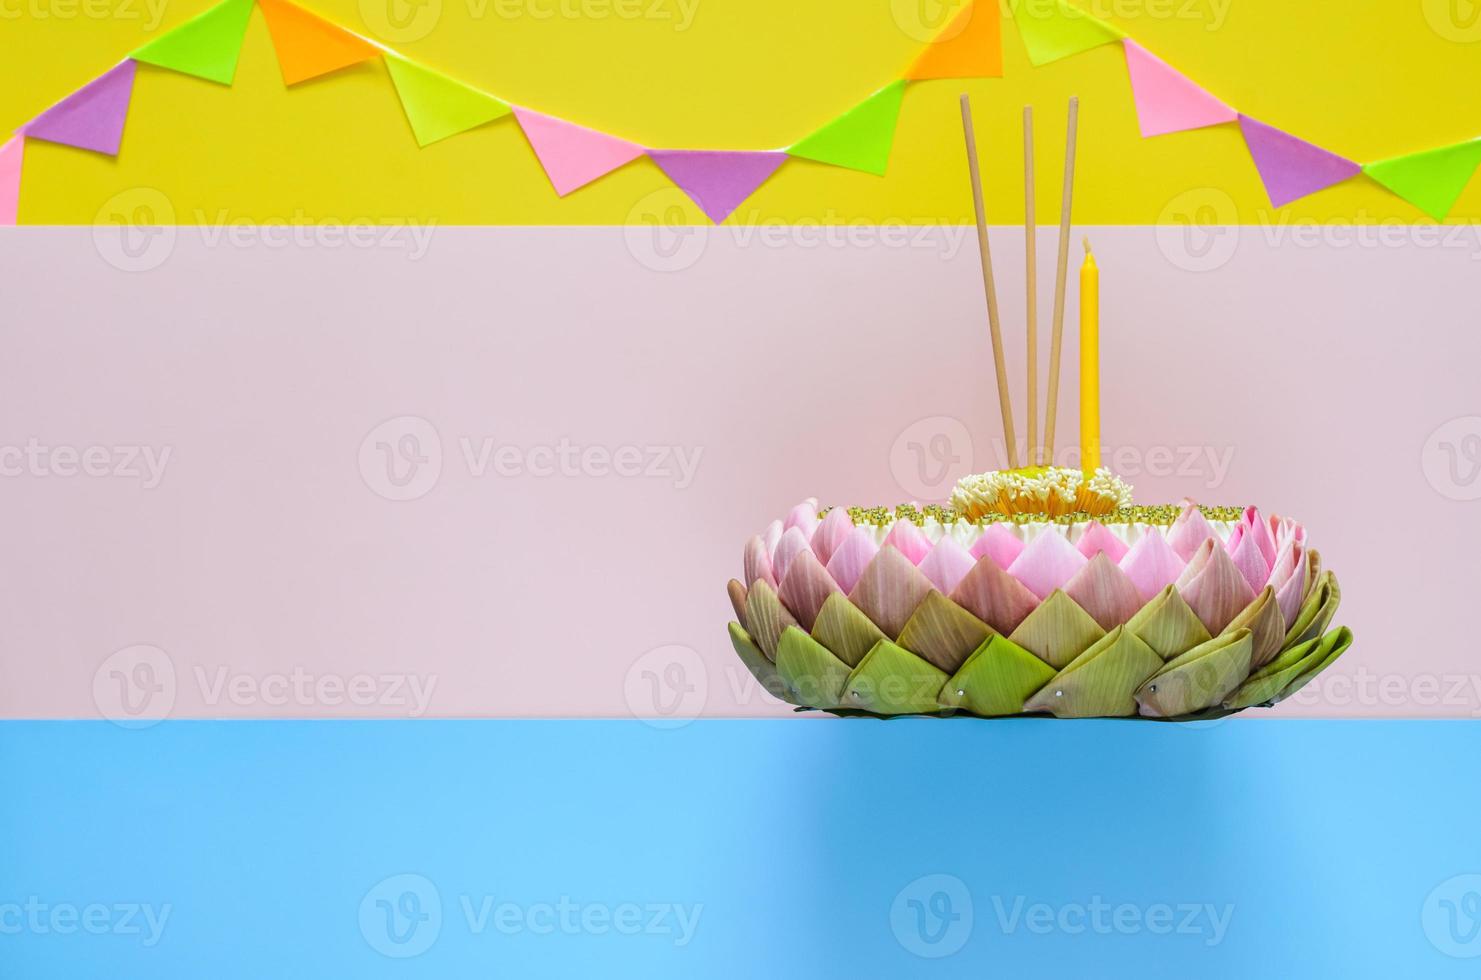 Selective focus at lotus pollen on top of pink lotus petal krathong with crown flower, incense stick and candle for Thailand Loy Krathong festival on colorful background with party flag. photo